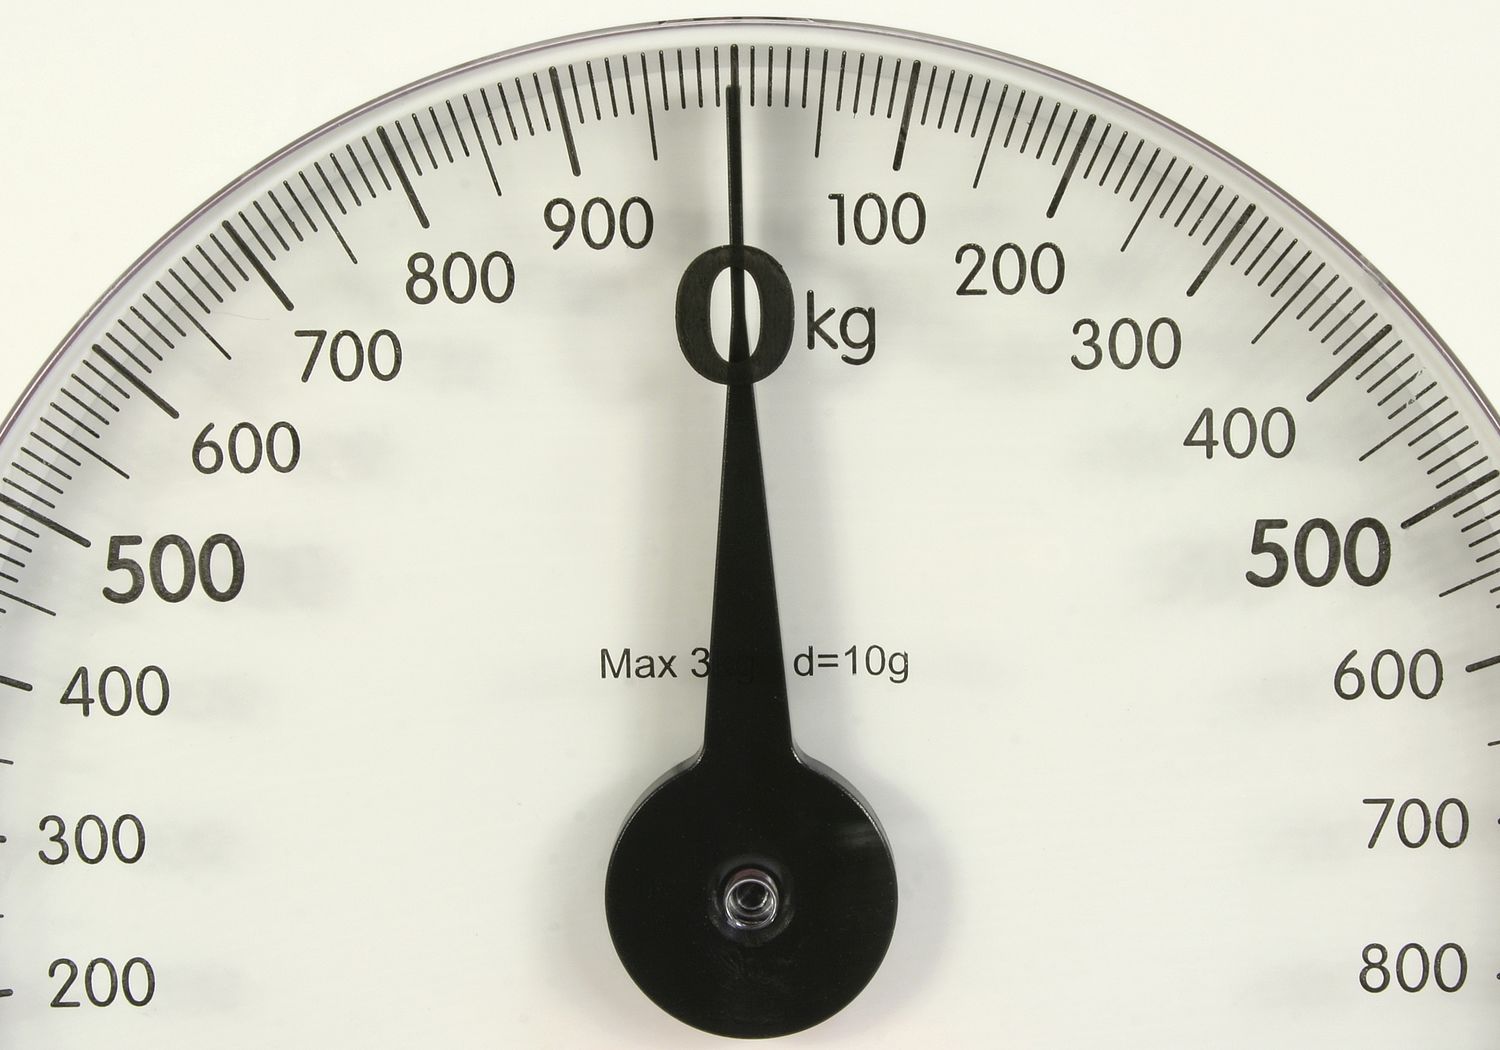 Image showing a Scales balance